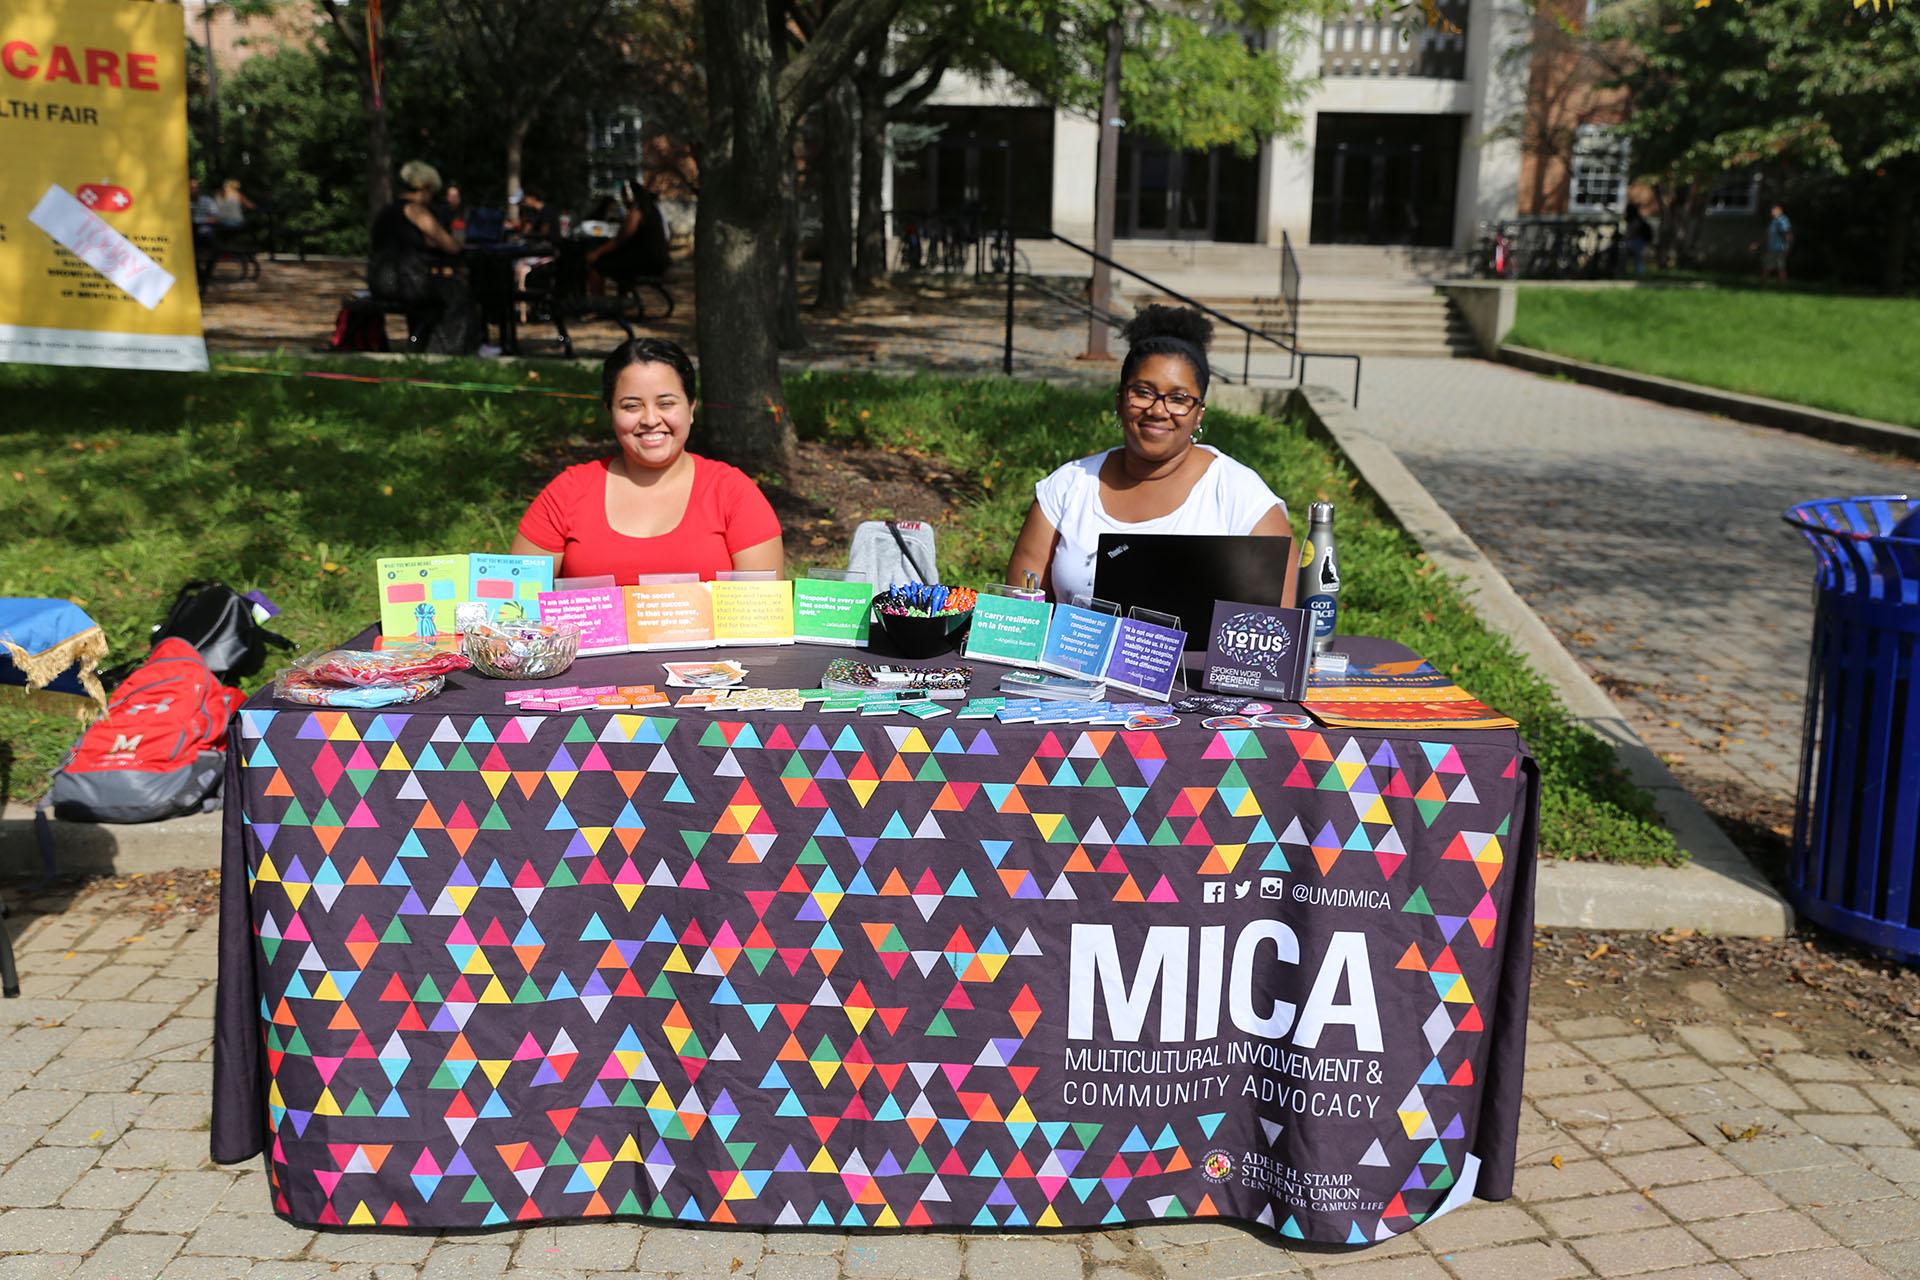 two people smiling behind an foldout table outside and draped with a cloth that reads MICA